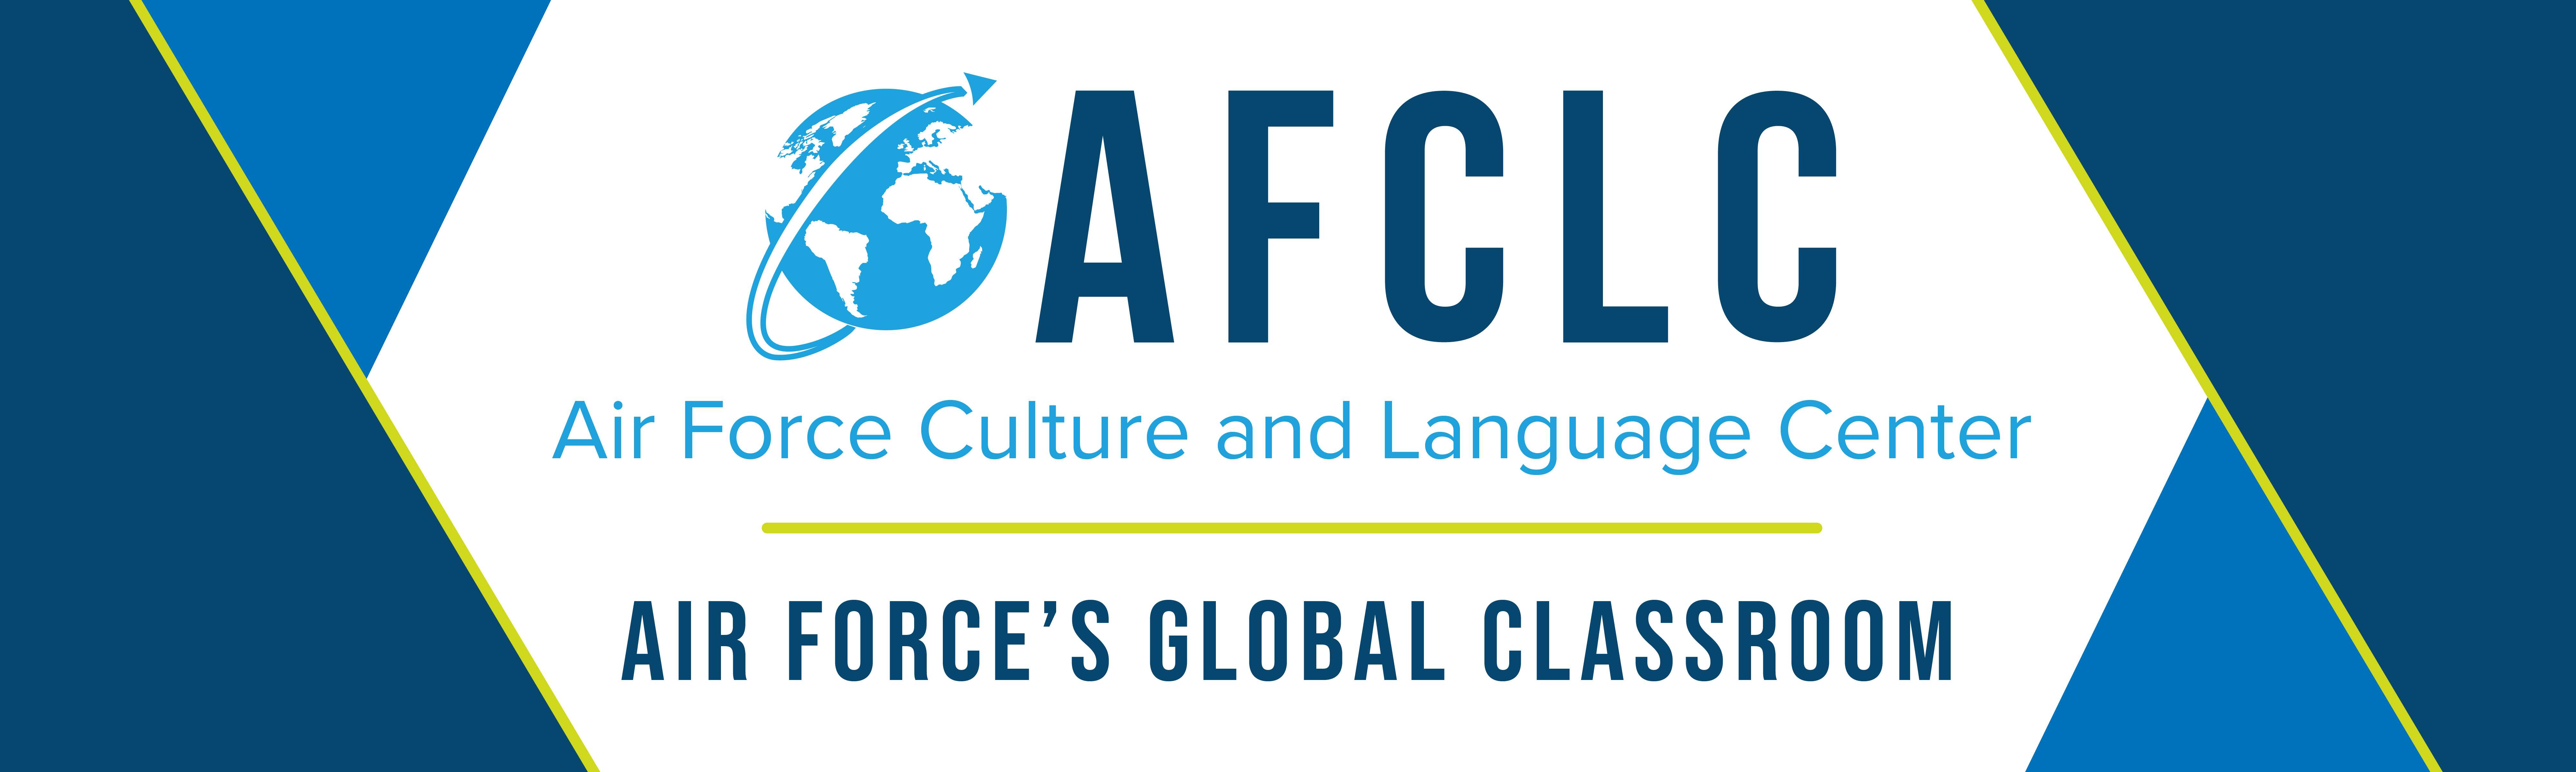 AFCLC, Air Force Culture and Language Center, Air Force's Global Classroom